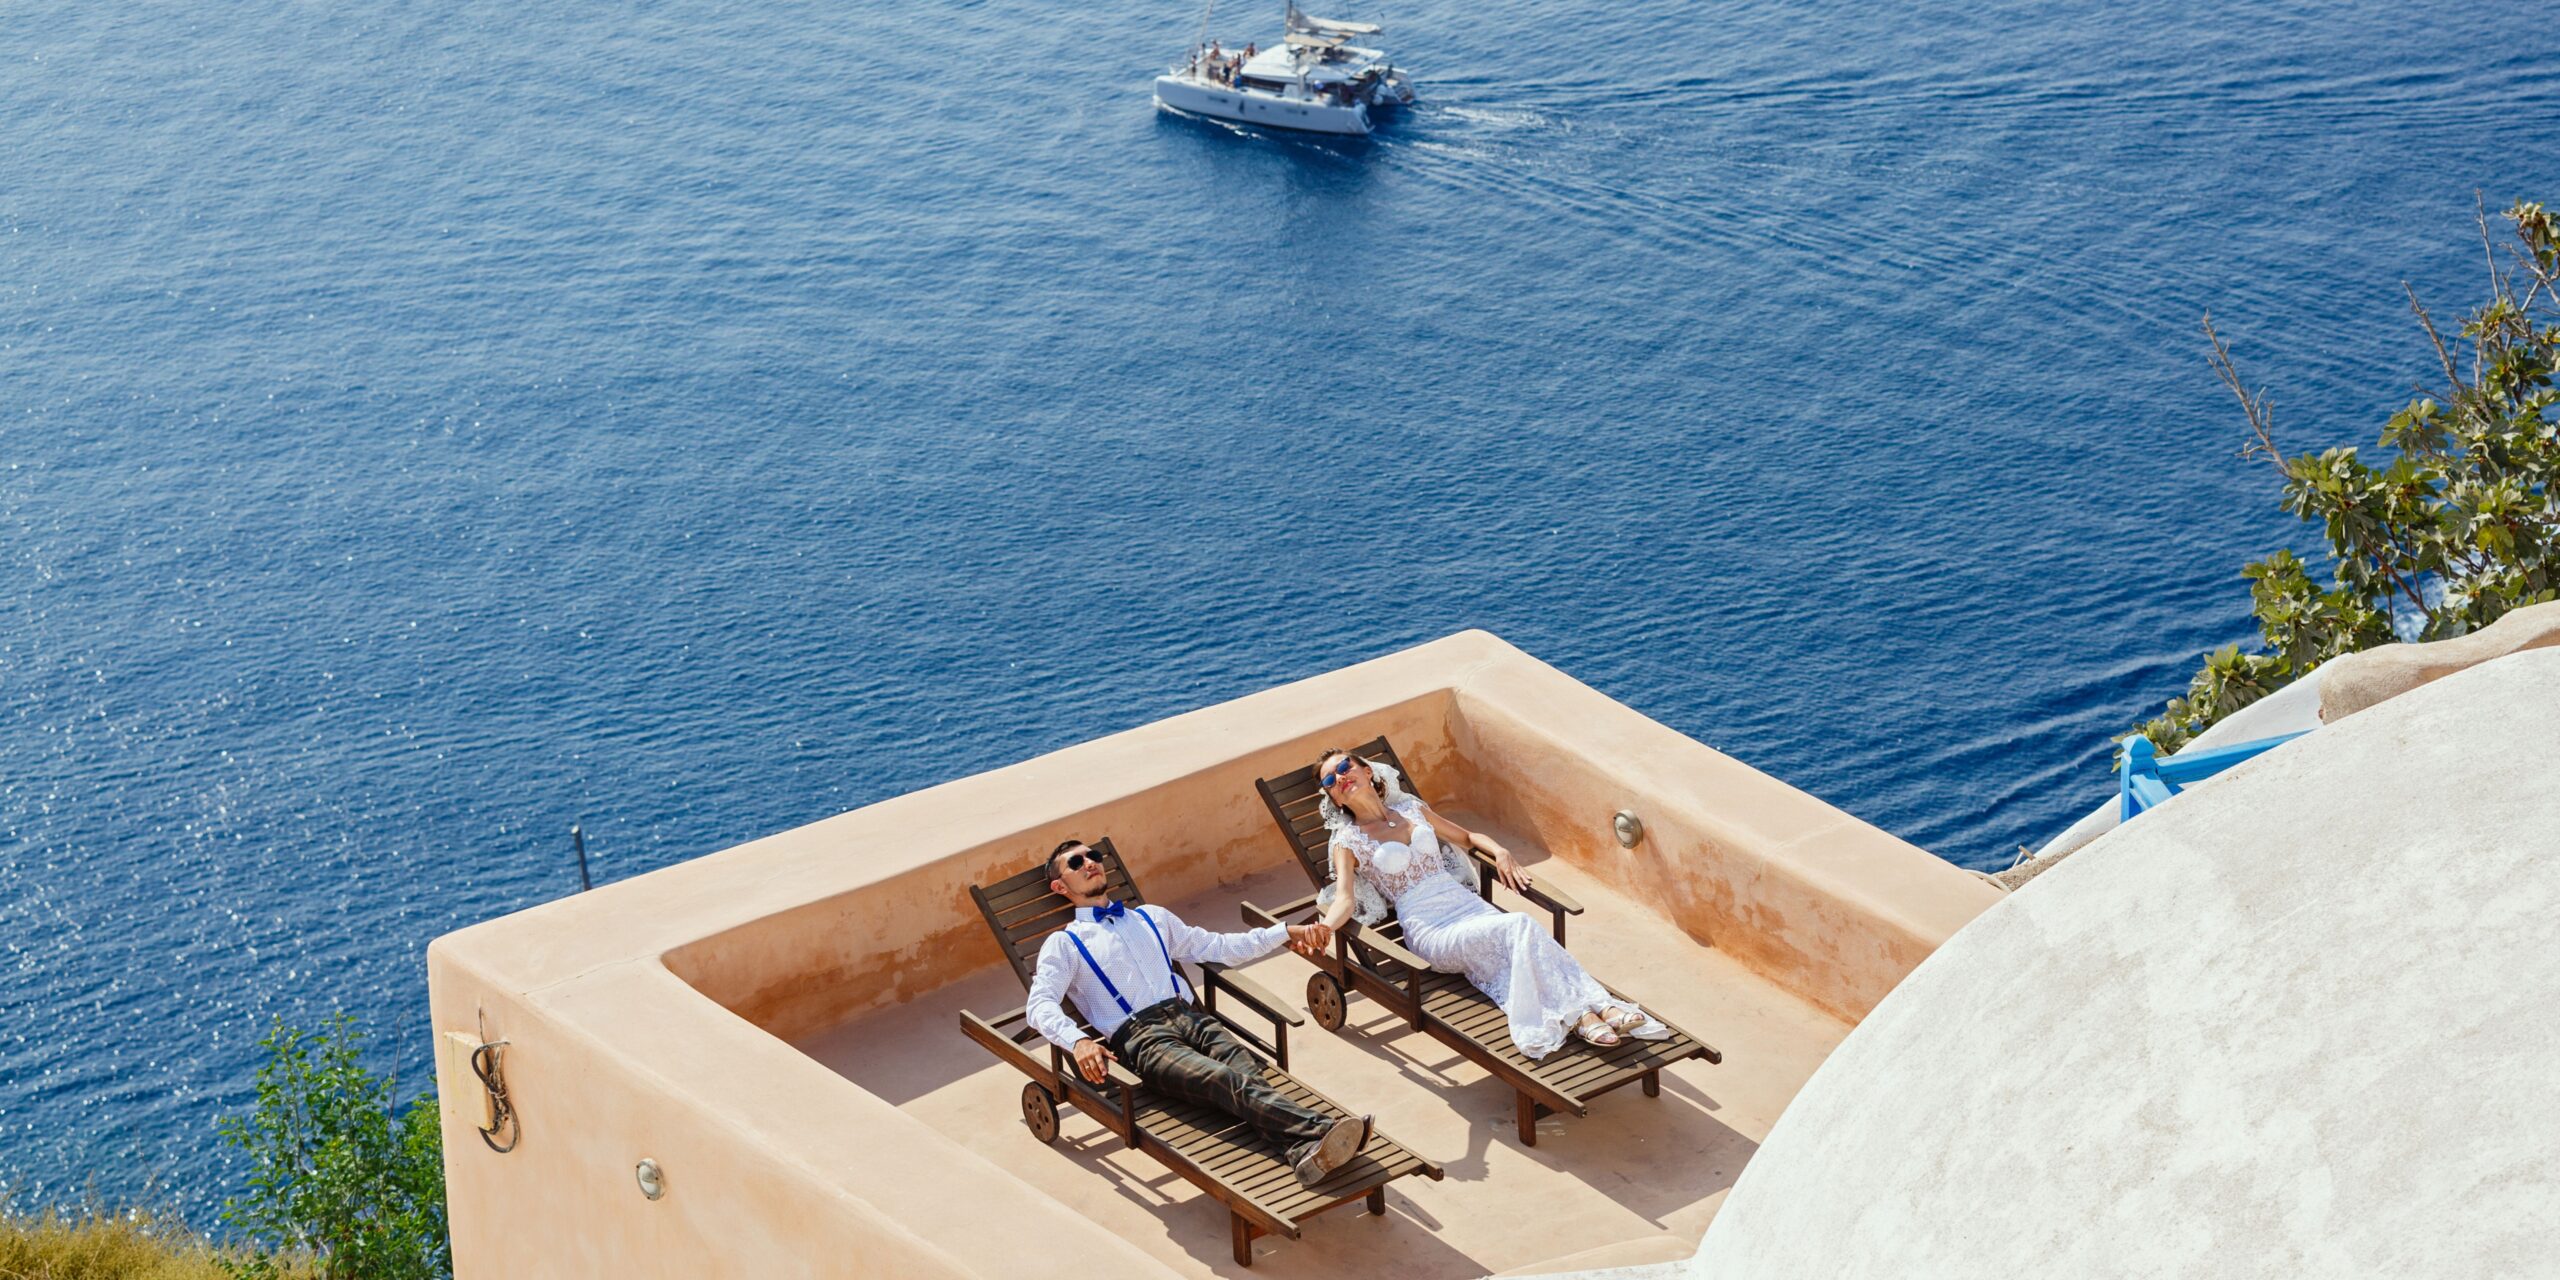 a couple dressed as a bride and groom overlooking the sea sitting on sunbeds getting their picture taken